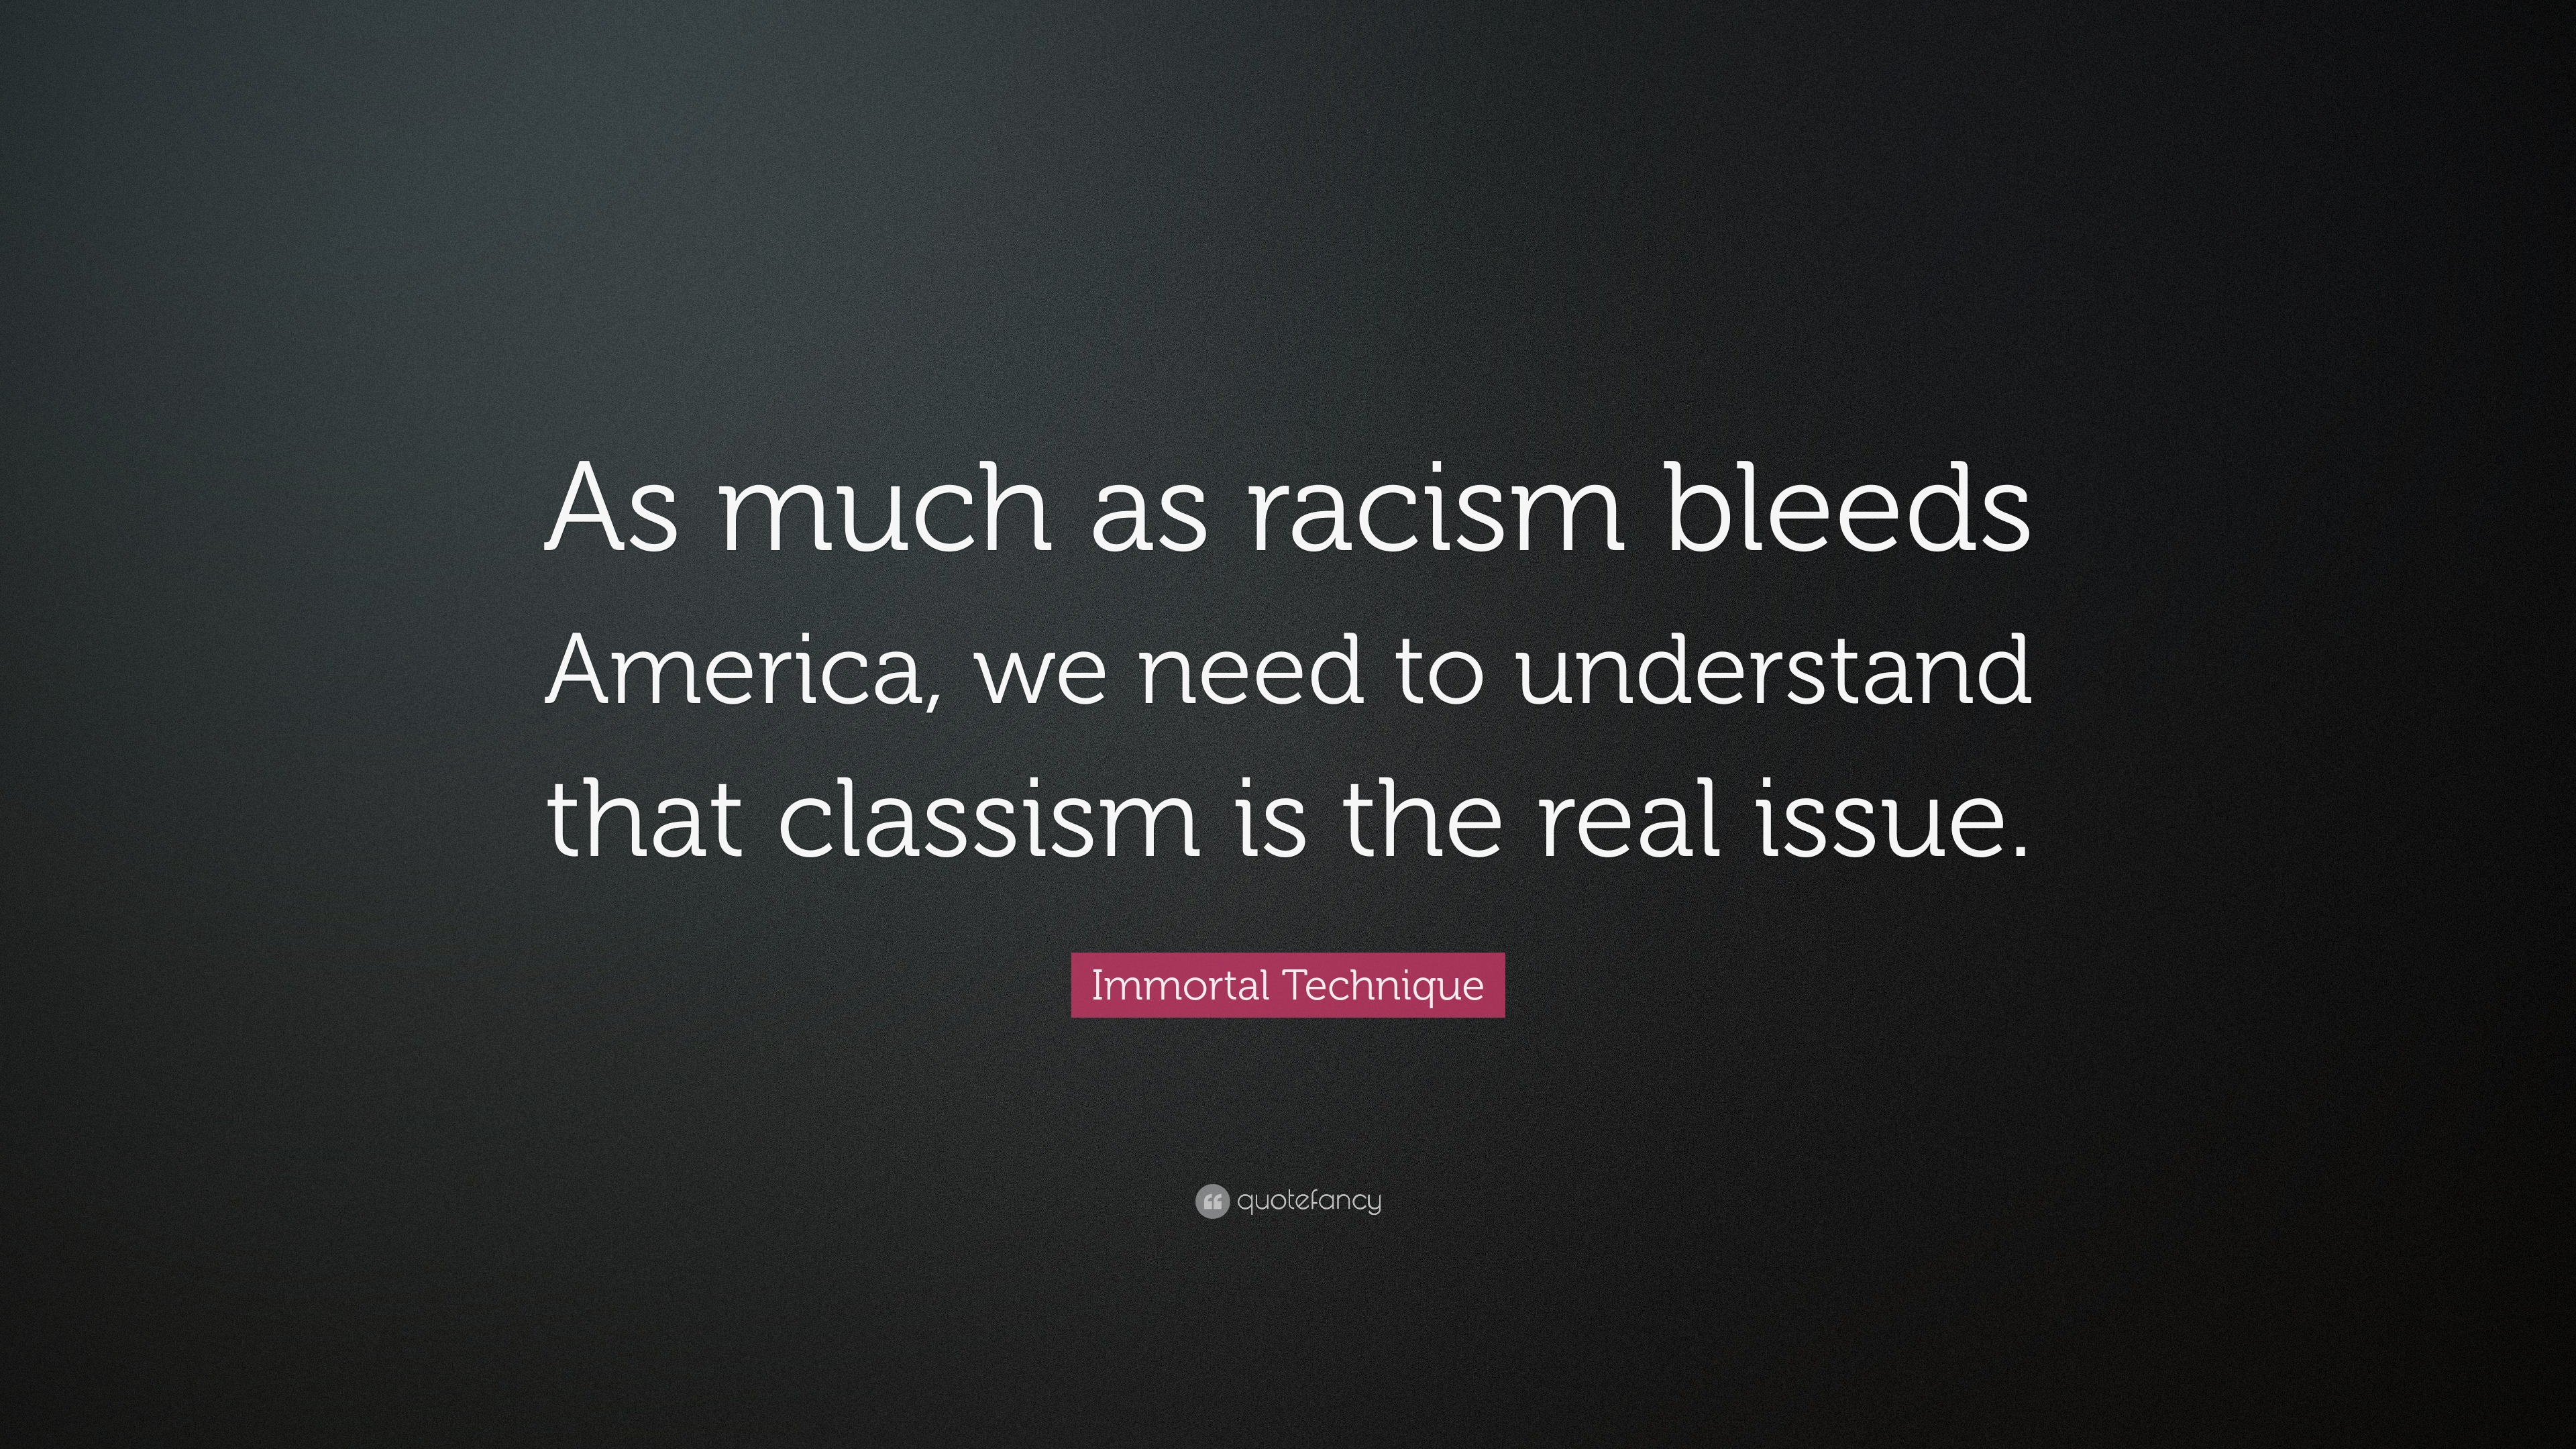 Classism Racism And Racism